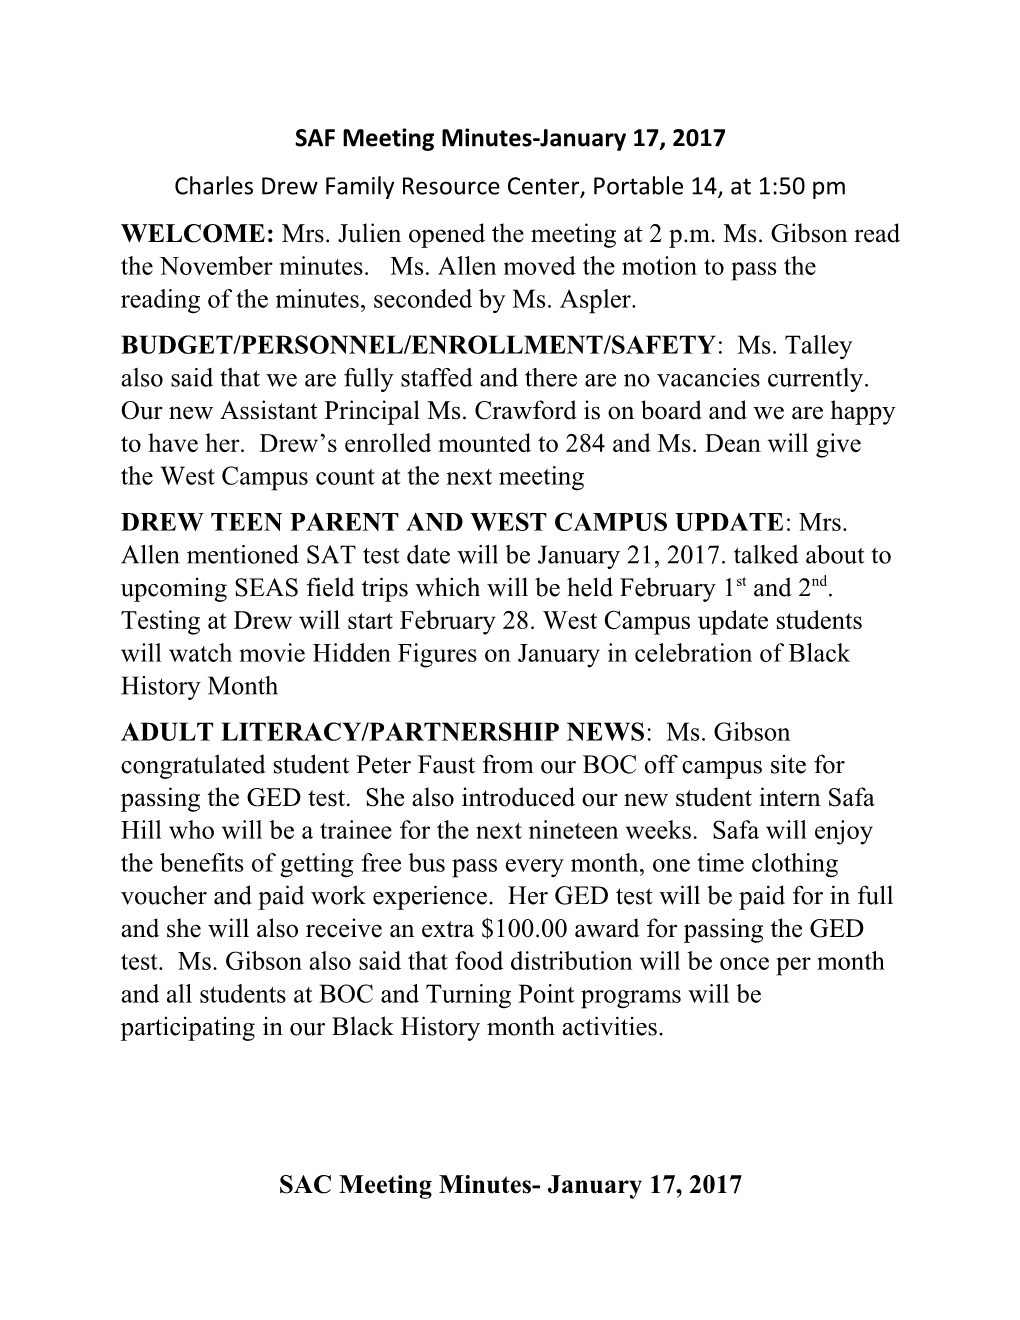 Charles Drew Family Resource Center, Portable 14, at 1:50 Pm